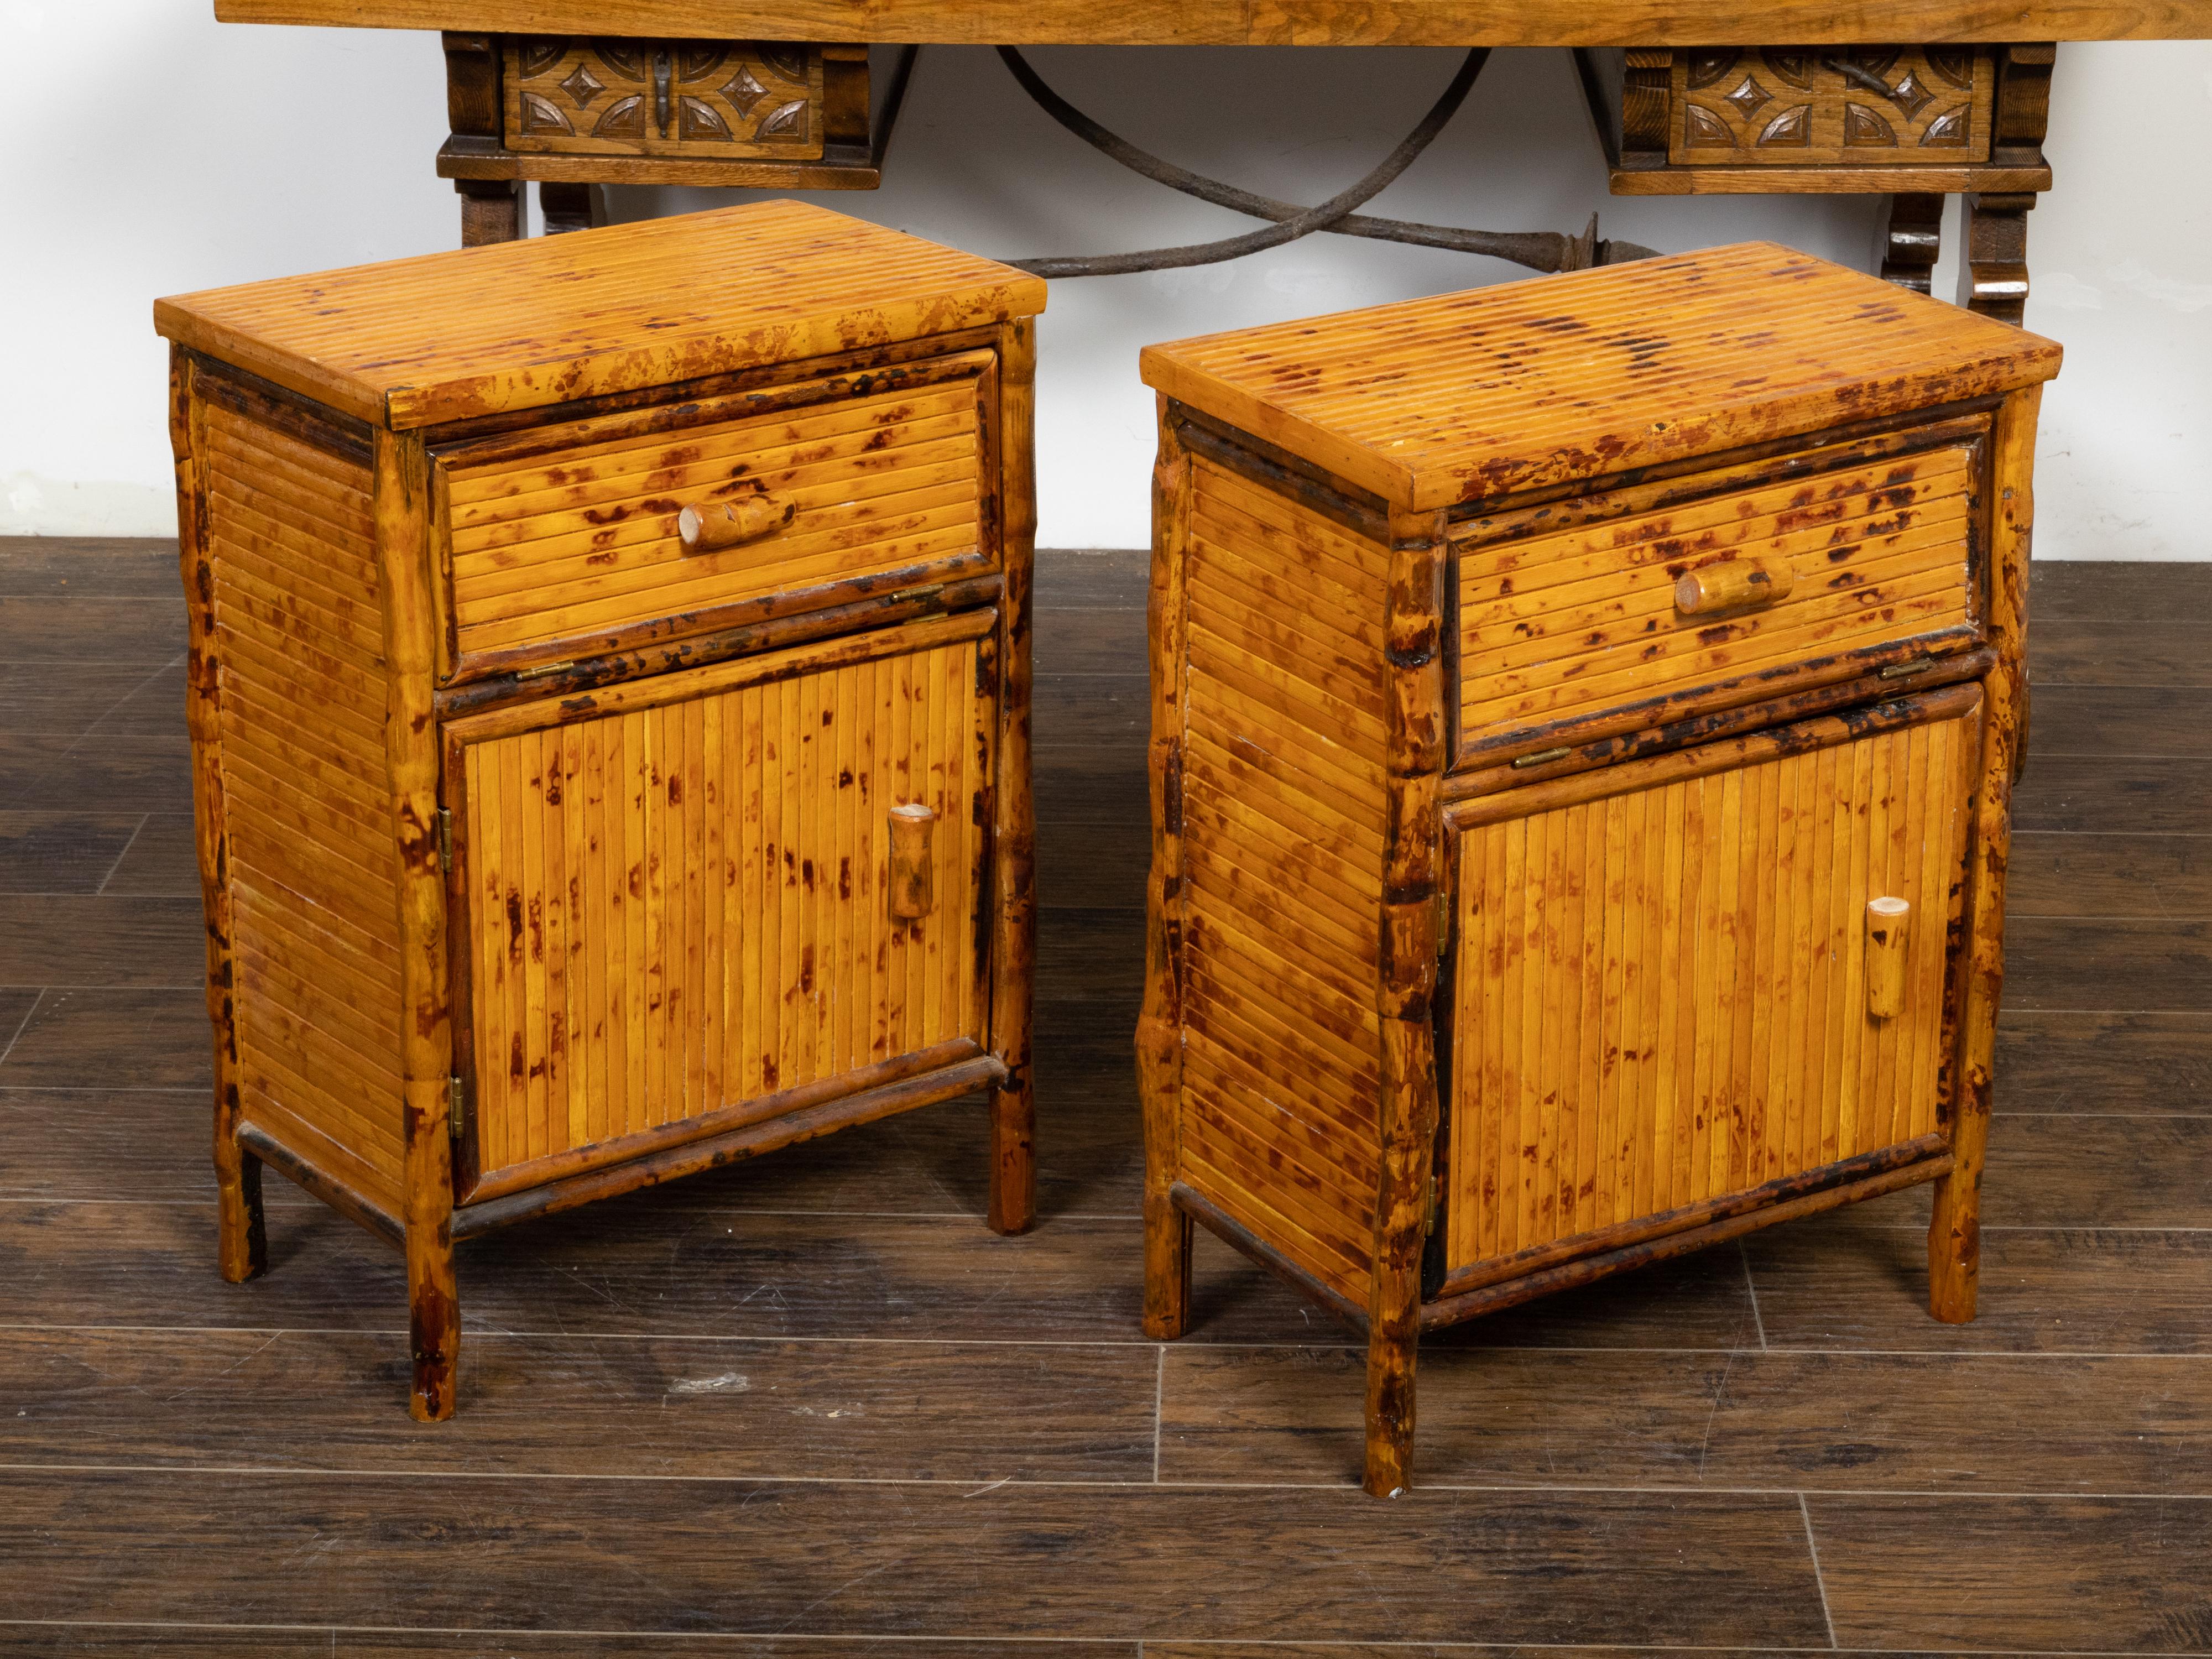 A vintage pair of English bamboo bedside cabinets from the mid 20th century with doors and rustic appearance. Created in England during the Midcentury period, each of this pair of bedside cabinets features a bamboo over wood structure boasting a